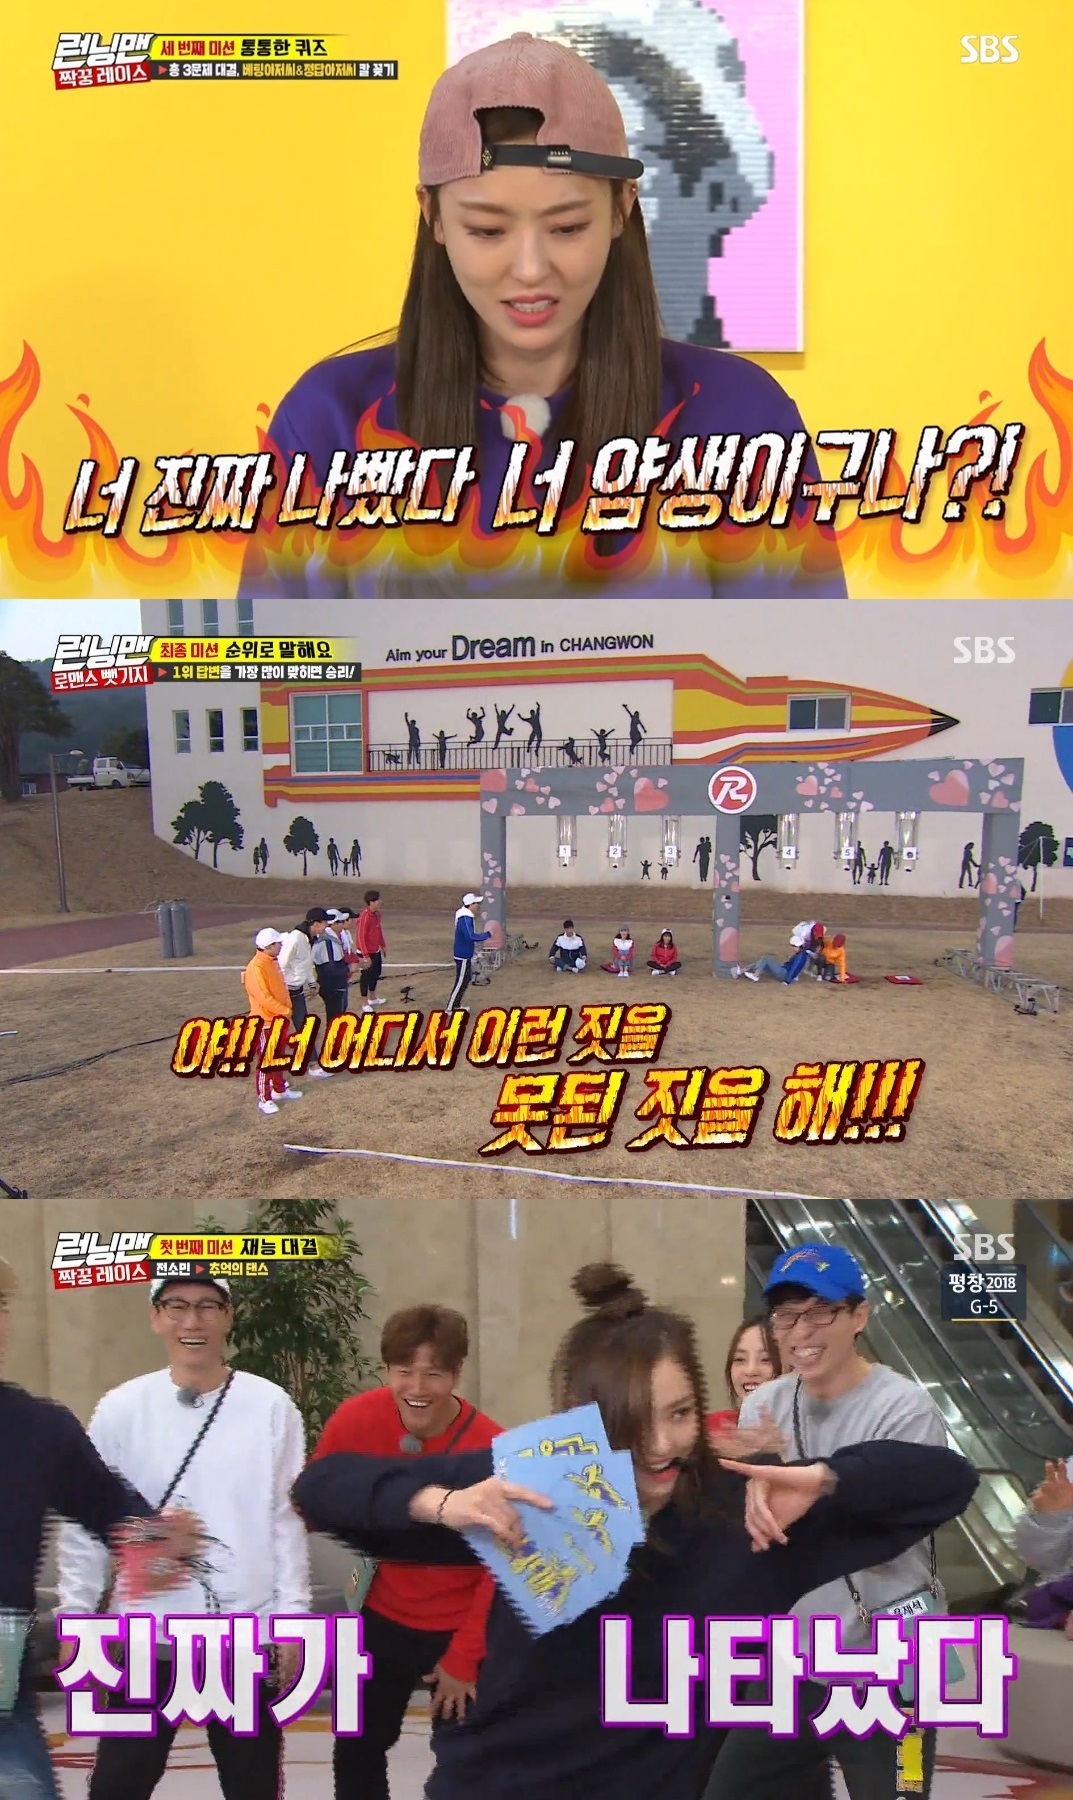 Seoul = = The stars of the show released by SBS Running Man are the topic.Black Pink Jenny Kim, who will meet with viewers through SBSs new Friday entertainment Michuri, which is broadcasted on the 16th, TWICE, which is sweeping the music charts as soon as it comes back, and Lee Da-hee, who is attracting attention as an impressive acting power in the drama Beauty Inside, are all the stars who have been with Running Man this year.They have been hot on online and SNS with the appearance of Running Man and have a sticky loyalty to reappear in Running Man again.Heres the Hollywood Actor Tom Cruise, where everything was smart, and Running Man loves Salmon Star of the Year.Black Pink Jenny Kim: Full-fledged Jenny Kim In-deok BroadcastingBlack Pink Jenny Kim gave a laugh with words and other actions.When Jenny Kim was paired with Lee Kwang-soo and entered the house of ghosts in Water Park, she gushed, Trust me only, but the result was a great wail.Running Man representative coward Lee Kwang-soo led Jenny Kim, and Jenny Kim cried at the raids of ghosts appearing every time she walked.After completing the mission, Jenny Kim said, Did not you say that you did not come out of ghosts? And the members declared their virtue to this cute figure of Jenny Kim.Since then, Jenny Kim has re-started in Running Man and has shown off her sticky loyalty.TWICE: The Birth of Affectionate + Dance ArtisansTWICE, who appeared in April and received the hot cheers of Running Man members, laughed at the past performance even though it was a surprise guest of Sommin Xs 1st anniversary special feature.Nayeon became a charming craftsman by creating the Kukukkaka Samhaeng City, which is still being talked about, and Dahyun and Momo devastated the scene with a godly dance close to reception.In particular, Dahyun was recognized as a dance machine that digests all choreography for each music from BTS burning to Celeb Five I want to be Celeb.Lee Da-hee: Flowfish Manufacturer without a breakActor Lee Da-hee, who was with the Family Package Project, made a relationship with Running Man with Yum-ki remarks.Lee Da-hee, who appeared in Running Man in February, witnessed trick during the mission with Lee Kwang-soo at the time and created an unexpected buzzword with the anger of You are a good boy.Lee Da-hee also made a buzzword that was not resting on the scene once again, saying, Where did you learn the bad thing?In addition, Lee Jung-hyuns Wow dance, wing walking penalties, etc., gave birth to a masterpiece.Tom Cruise: Why is your brother coming out of Running Man?Hollywood Actor Tom Cruise, who can never miss the Running Man best guest of the year, was all the cuts.In the movie Mission Impossible, it shows the essence of real action, but in Running Man, it showed the charm of playing the game with the members and showed the unique familiar charm by attaching the name tag of Running Man signature.Tom Cruises passionate performance in entertainment has received not only Running Man but also online and SNS, and has made him reborn as a hot-sham star.Meanwhile, Running Man, which is broadcasted at 4:50 pm on November 11, is decorated with a special 8 brothers and sisters race.